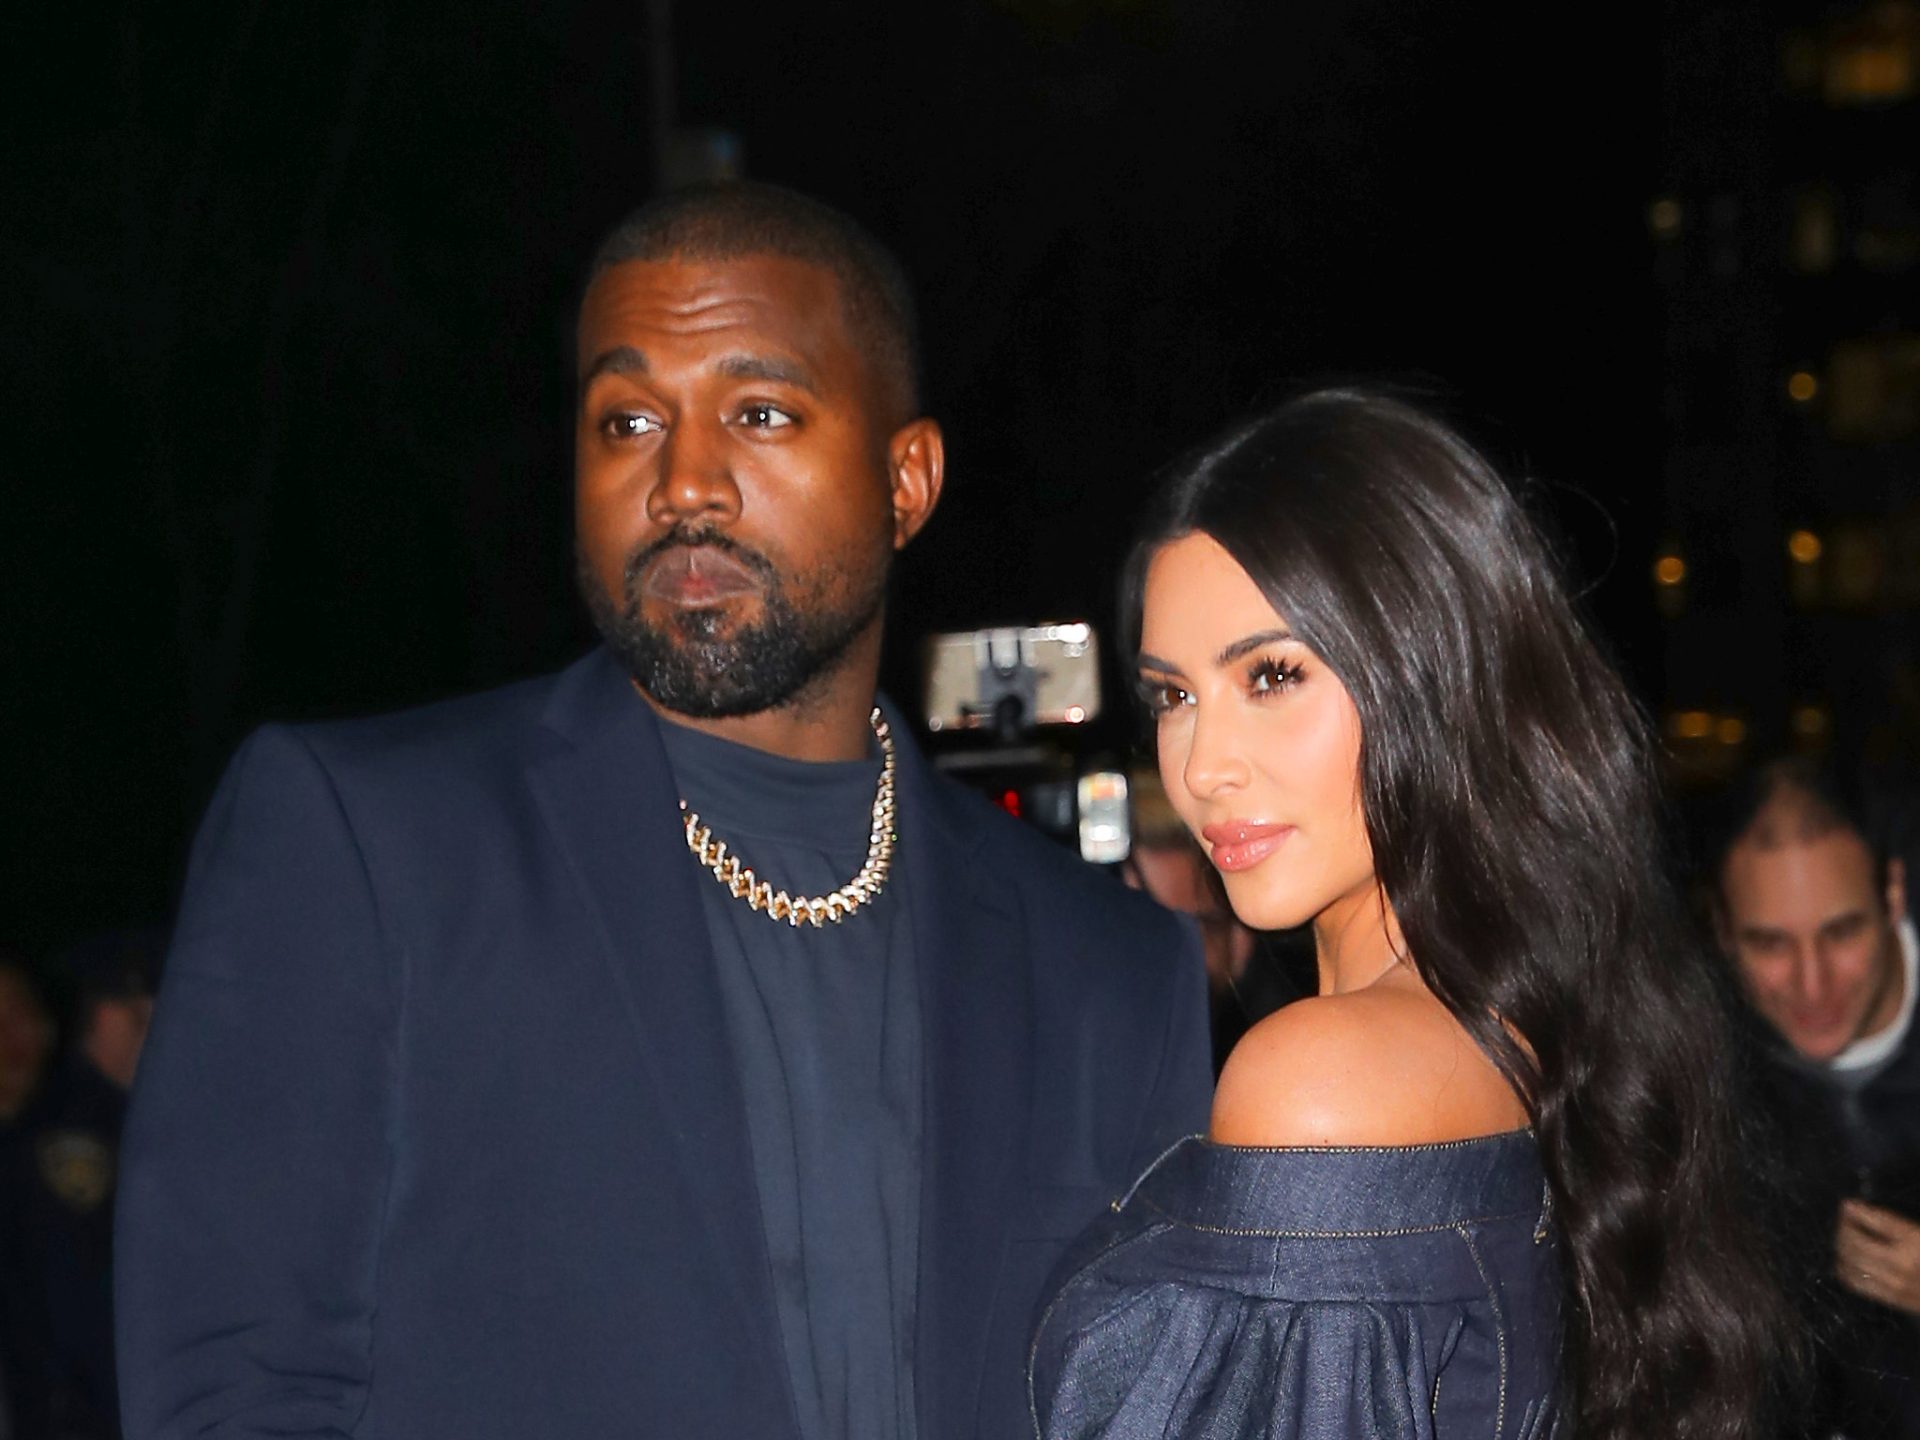 Kim Kardashian cries over co-parenting with Kanye West (video)